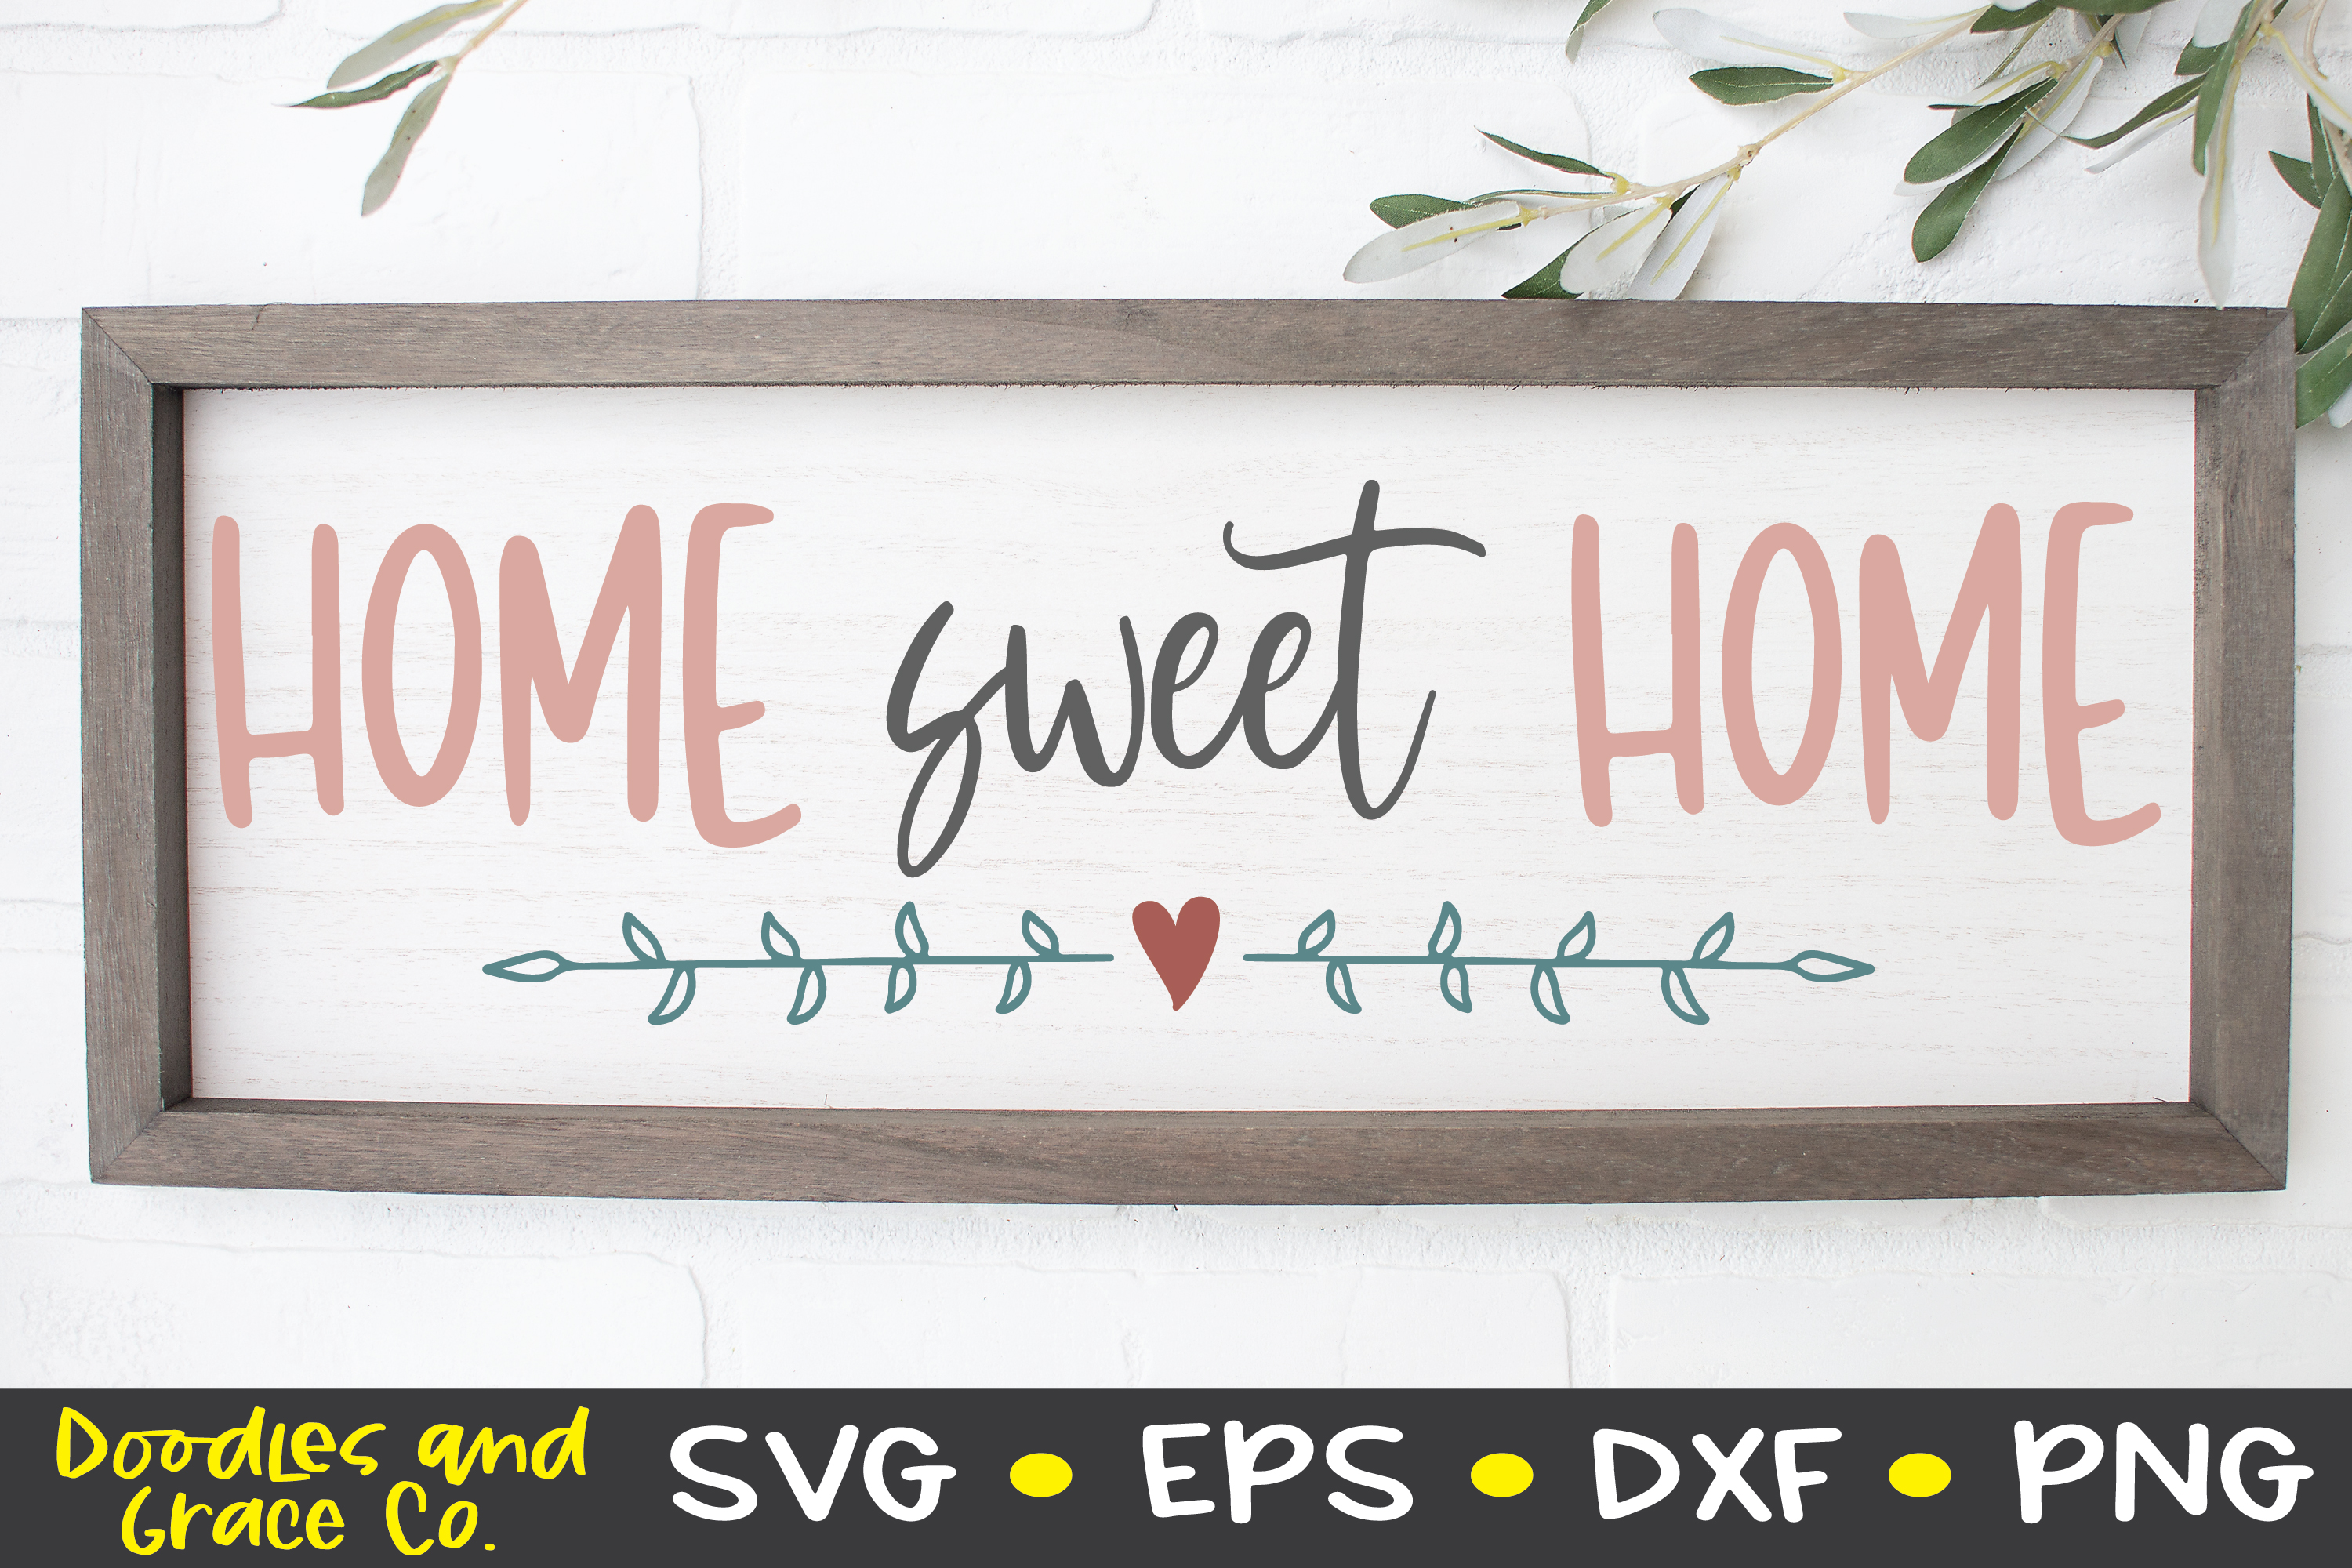 Download Home Sweet Home SVG - Welcome SVG - EPS - DXF - PNG